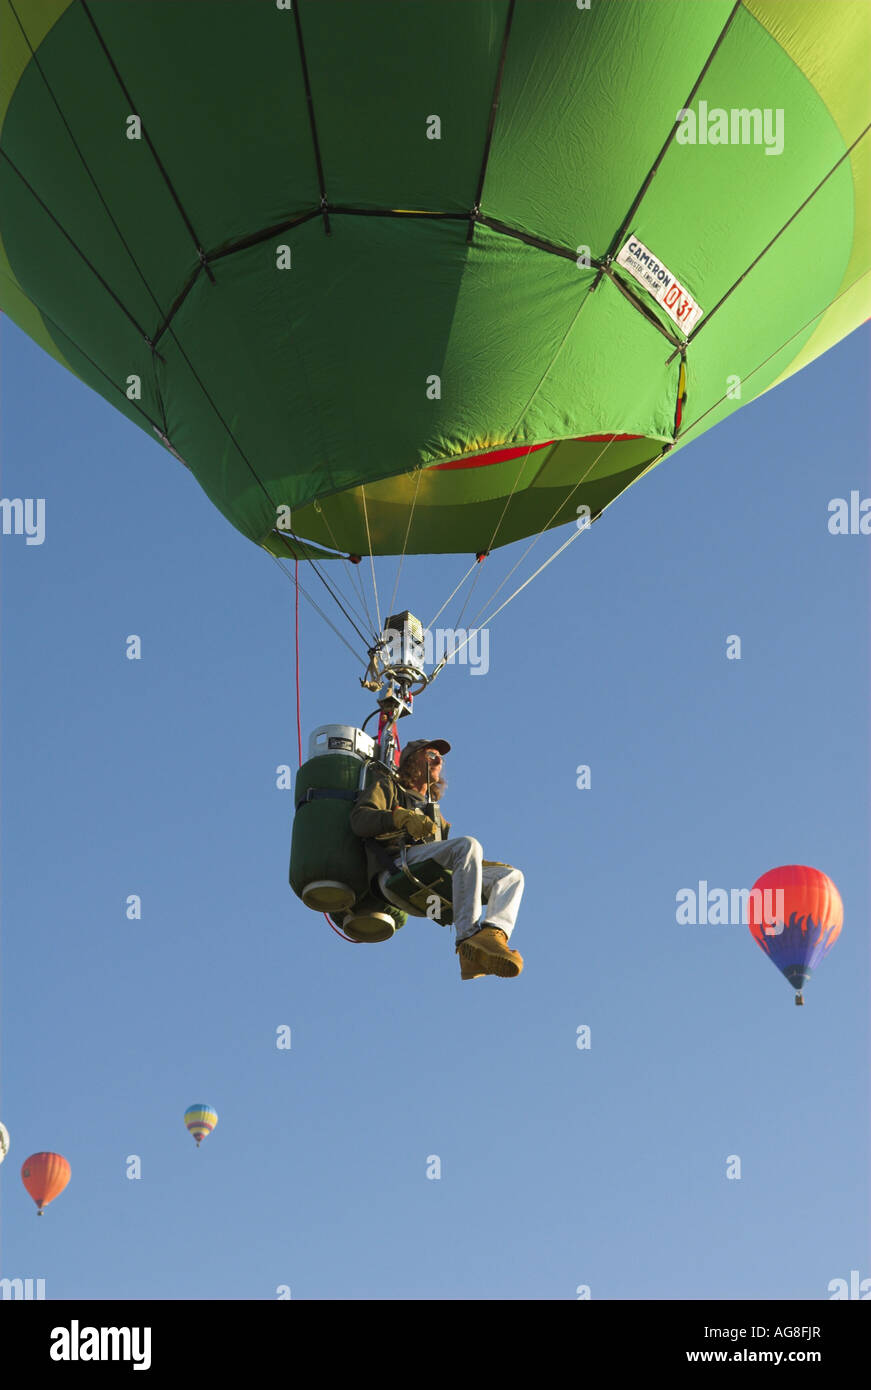 Single seater. Hot-air balloon at the Lorraine Air Mondial 2007, the biggest bolloon festival in the world, France, Lorraine, C Stock Photo